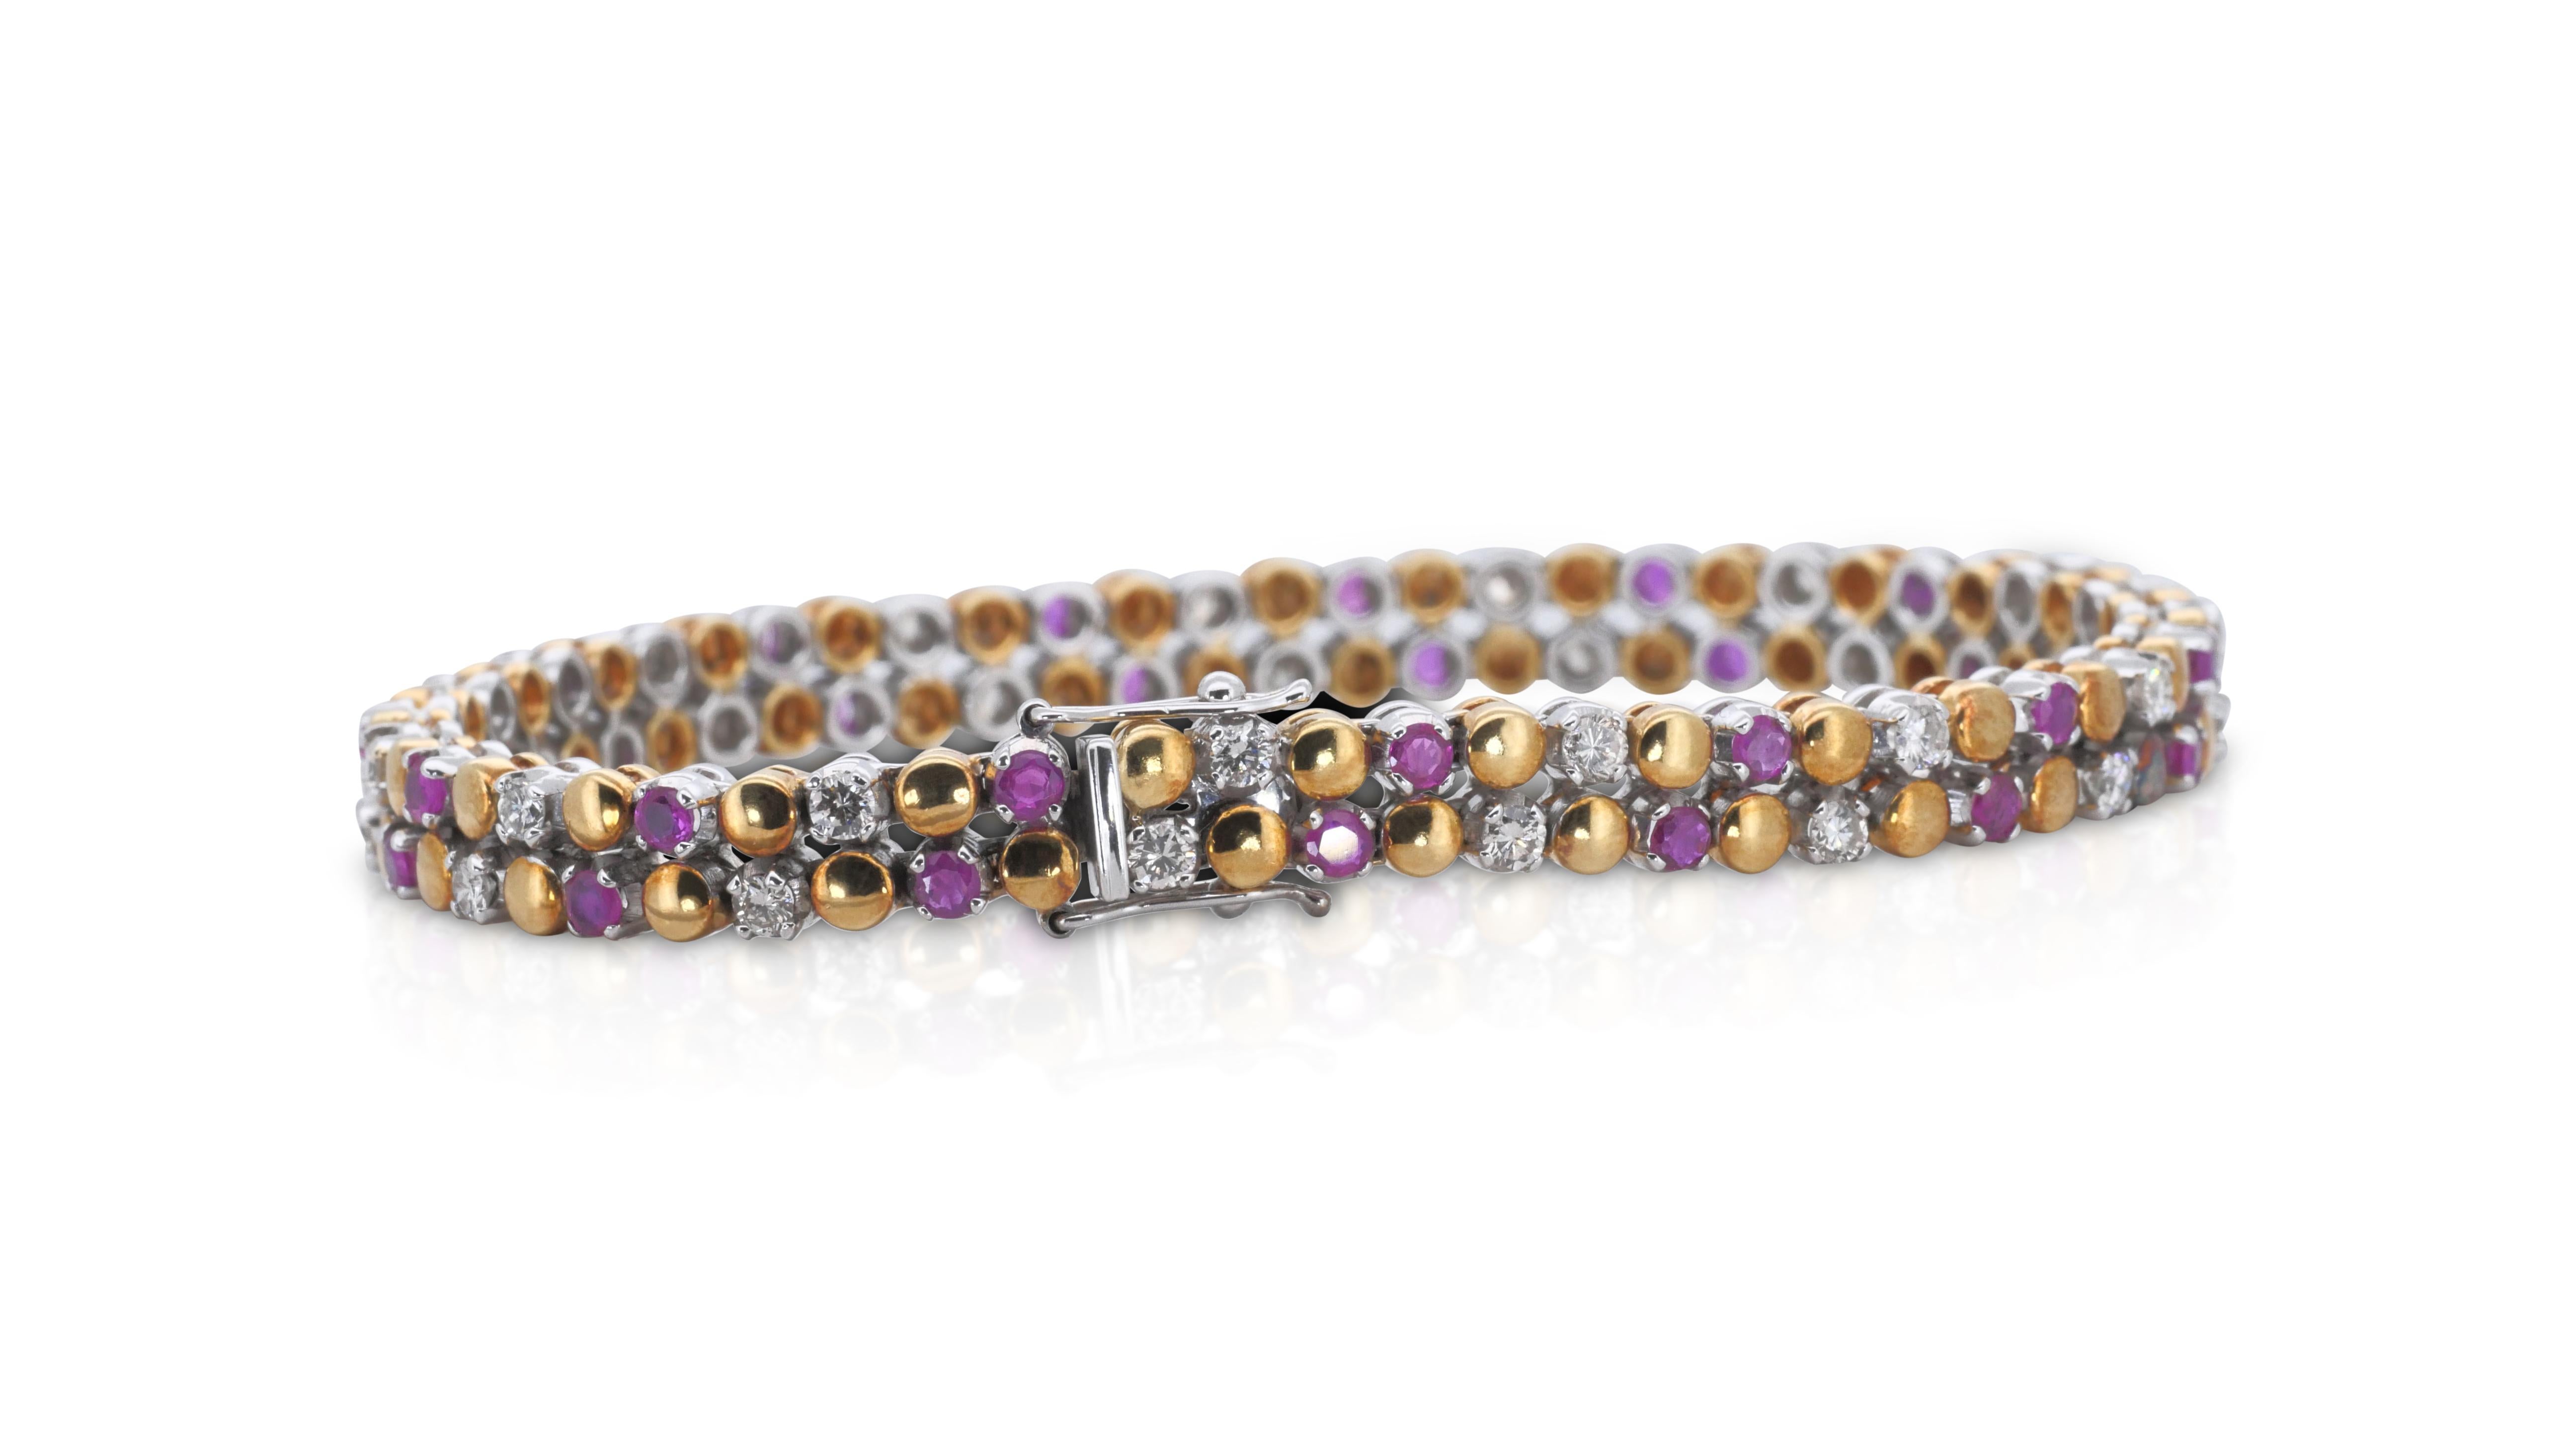 A beautiful bracelet with a dazzling 0.6 carat Round Brilliant natural diamonds. It has 0.6 carat of side rubies which add more to its elegance. The jewelry is made of 18k Yellow gold with a high quality polish. It comes with NGI certificate and a